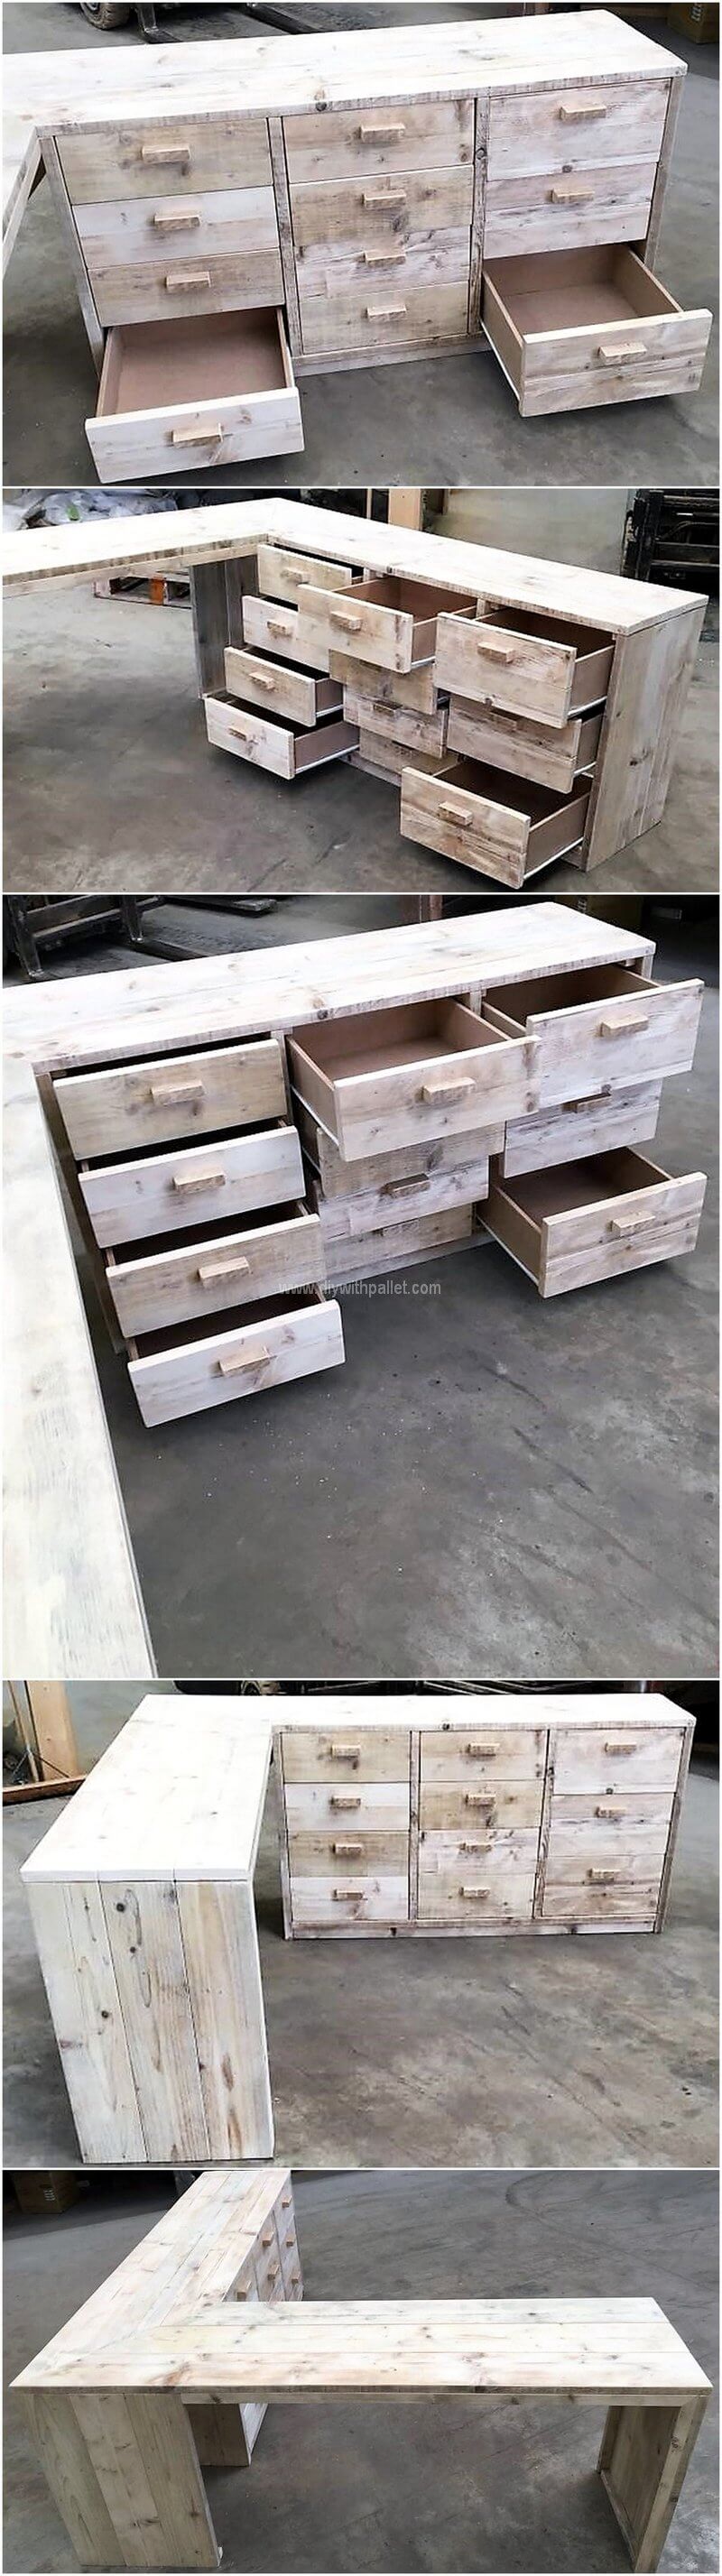 pallet table with storage drawers